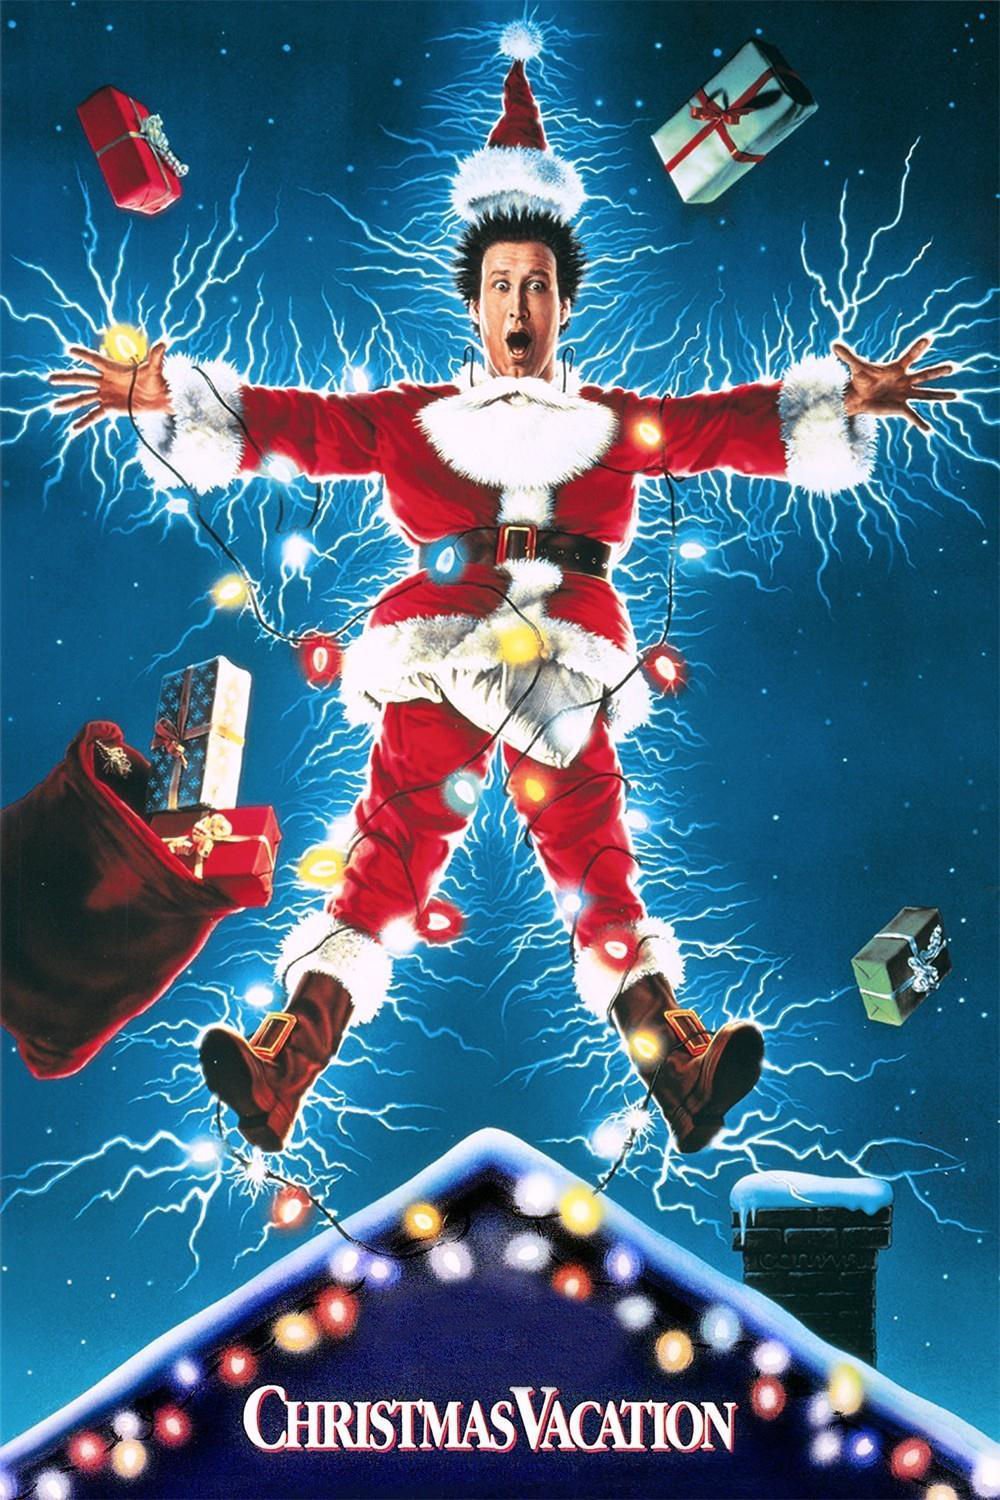 Poster for the movie "National Lampoon's Christmas Vacation"